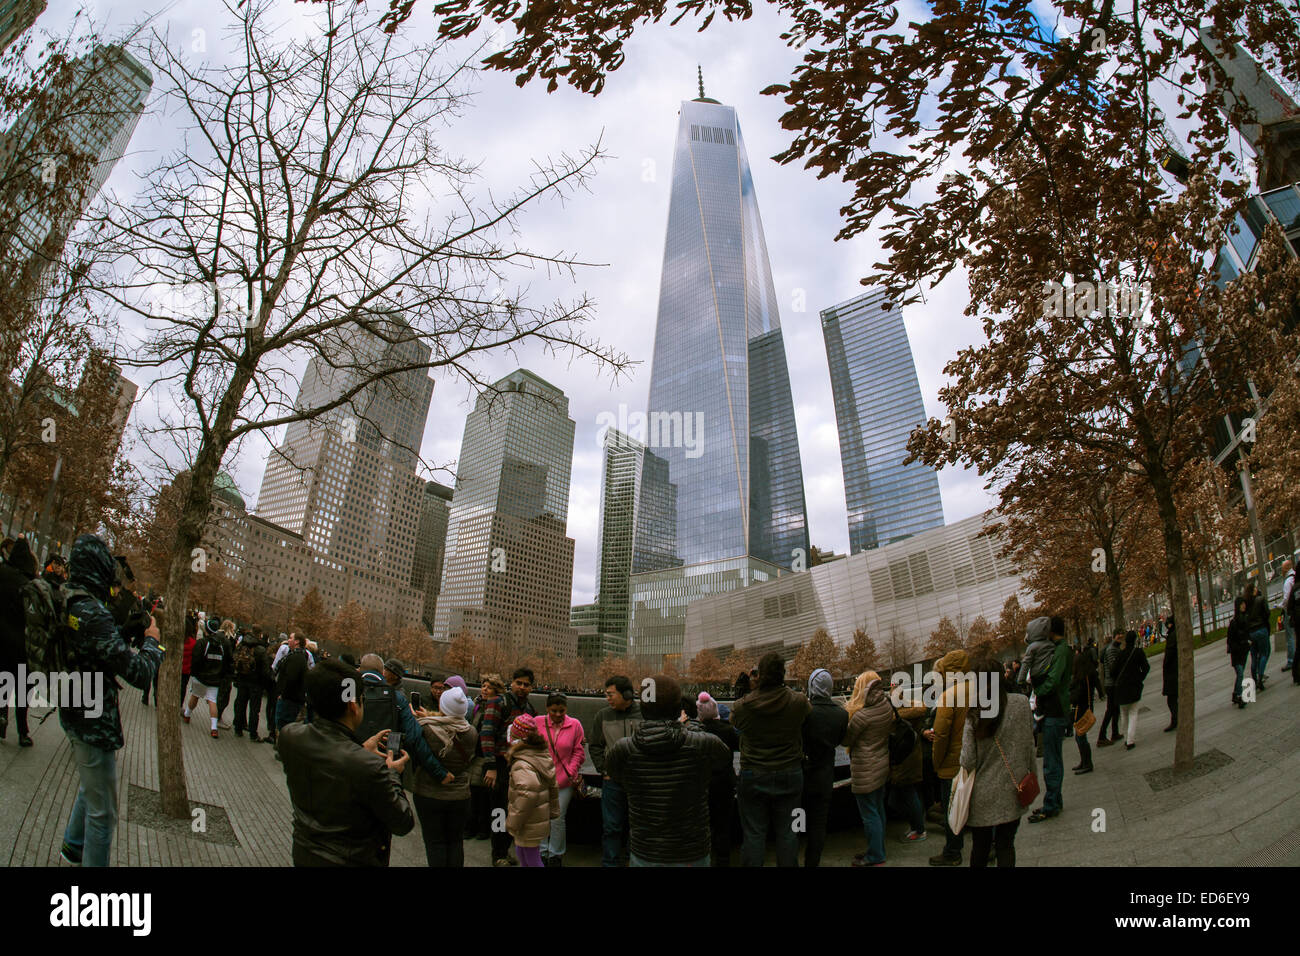 One World Trade Center rises over visitors to the National September 11 Memorial & Museum in New York on Christmas, Thursday, December 25, 2014. The memorial consists of twin memorial pools on the footprints of the World Trade Center and a plaza planted with more than 400 swamp white oak trees. The names of the 2983 victims of 9/11 and the February 1993 WTC attack are inscribed around the base of the pools. (© Richard B. Levine) Stock Photo